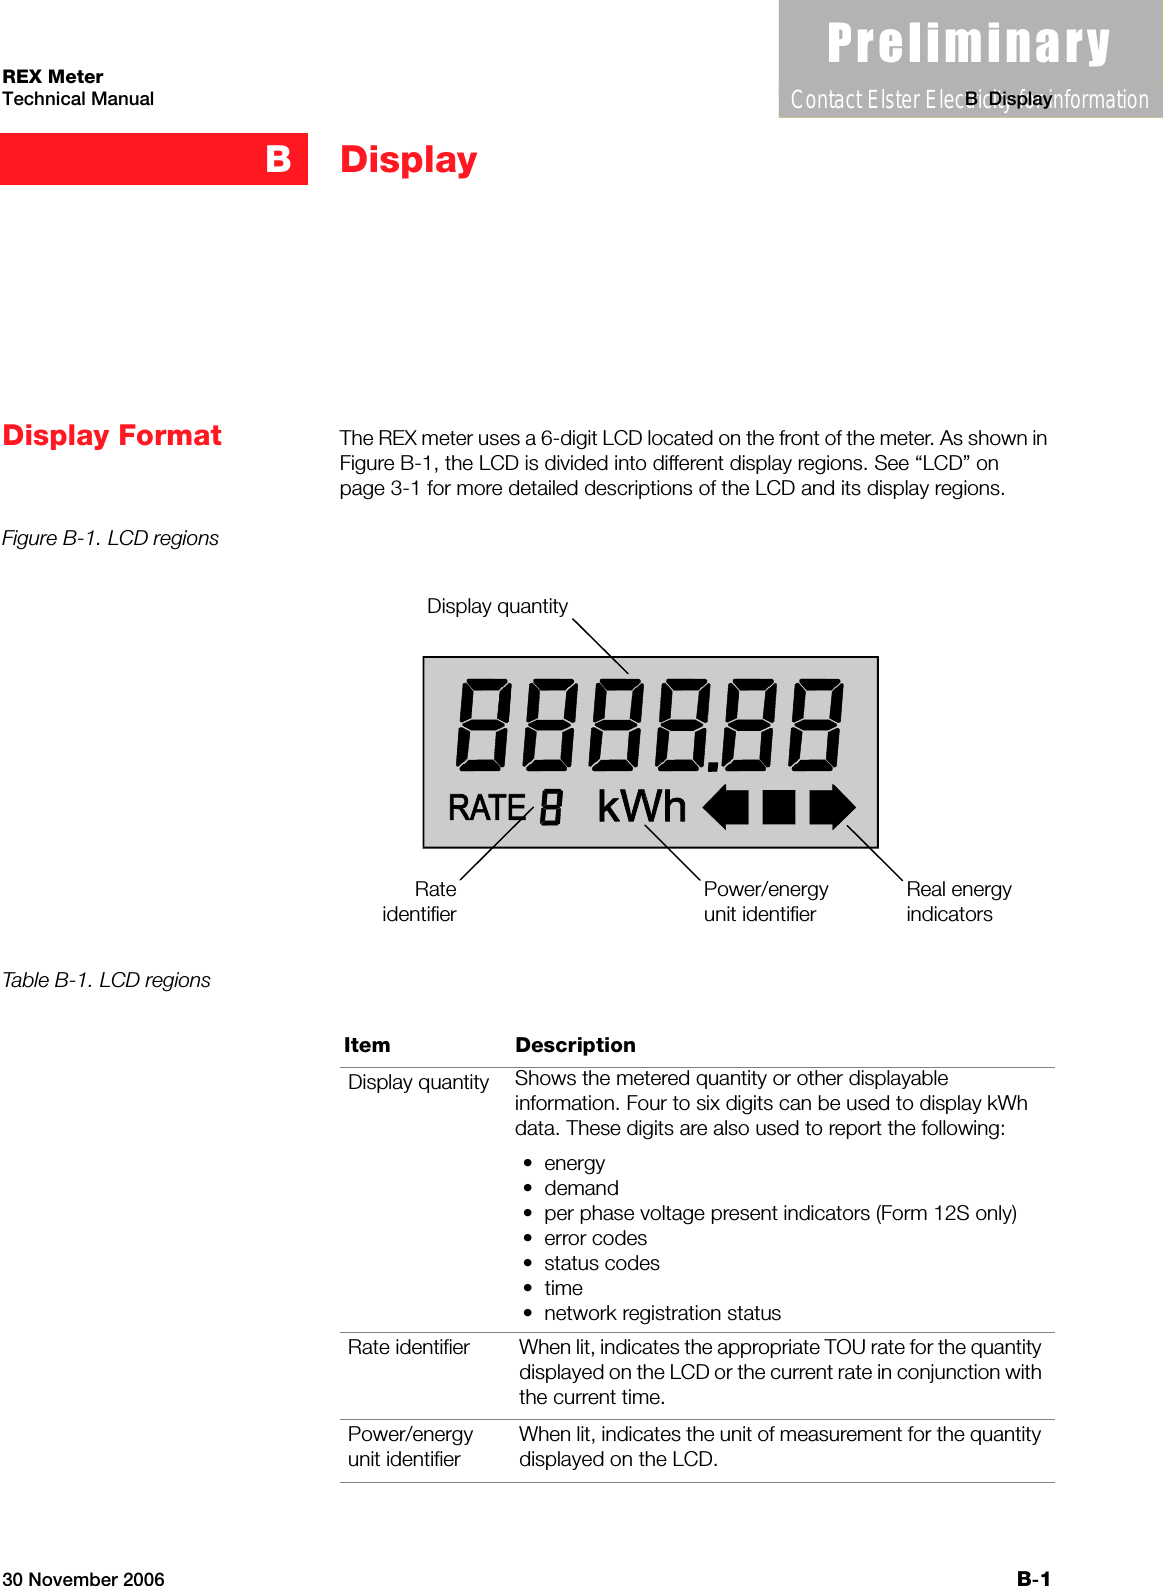 3UHOLPLQDU\Contact Elster Electricity for information30 November 2006 B-1REX MeterTechnical Manual B  DisplayBDisplayDisplay Format The REX meter uses a 6-digit LCD located on the front of the meter. As shown in Figure B-1, the LCD is divided into different display regions. See “LCD” on page 3-1 for more detailed descriptions of the LCD and its display regions.Figure B-1. LCD regionsTable B-1. LCD regionsDisplay quantityReal energyindicatorsPower/energyunit identifierRateidentifierItem DescriptionDisplay quantity Shows the metered quantity or other displayable information. Four to six digits can be used to display kWh data. These digits are also used to report the following:•  energy•  demand•  per phase voltage present indicators (Form 12S only)•  error codes•  status codes•  time•  network registration statusRate identifier When lit, indicates the appropriate TOU rate for the quantity displayed on the LCD or the current rate in conjunction with the current time.Power/energy unit identifierWhen lit, indicates the unit of measurement for the quantity displayed on the LCD.Technical ManualREX Meter